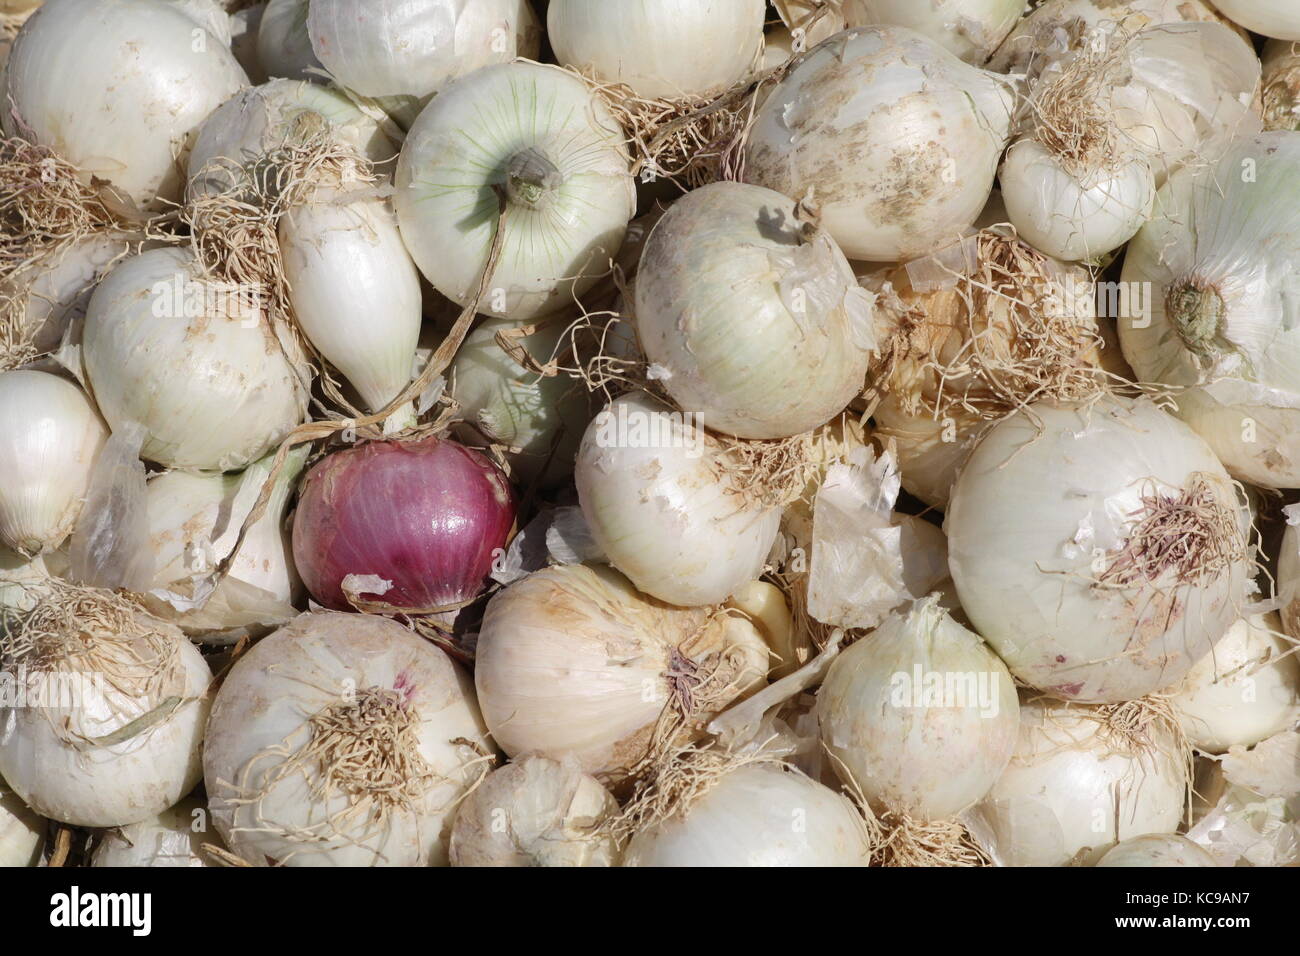 White Onions and one red Onion Stock Photo